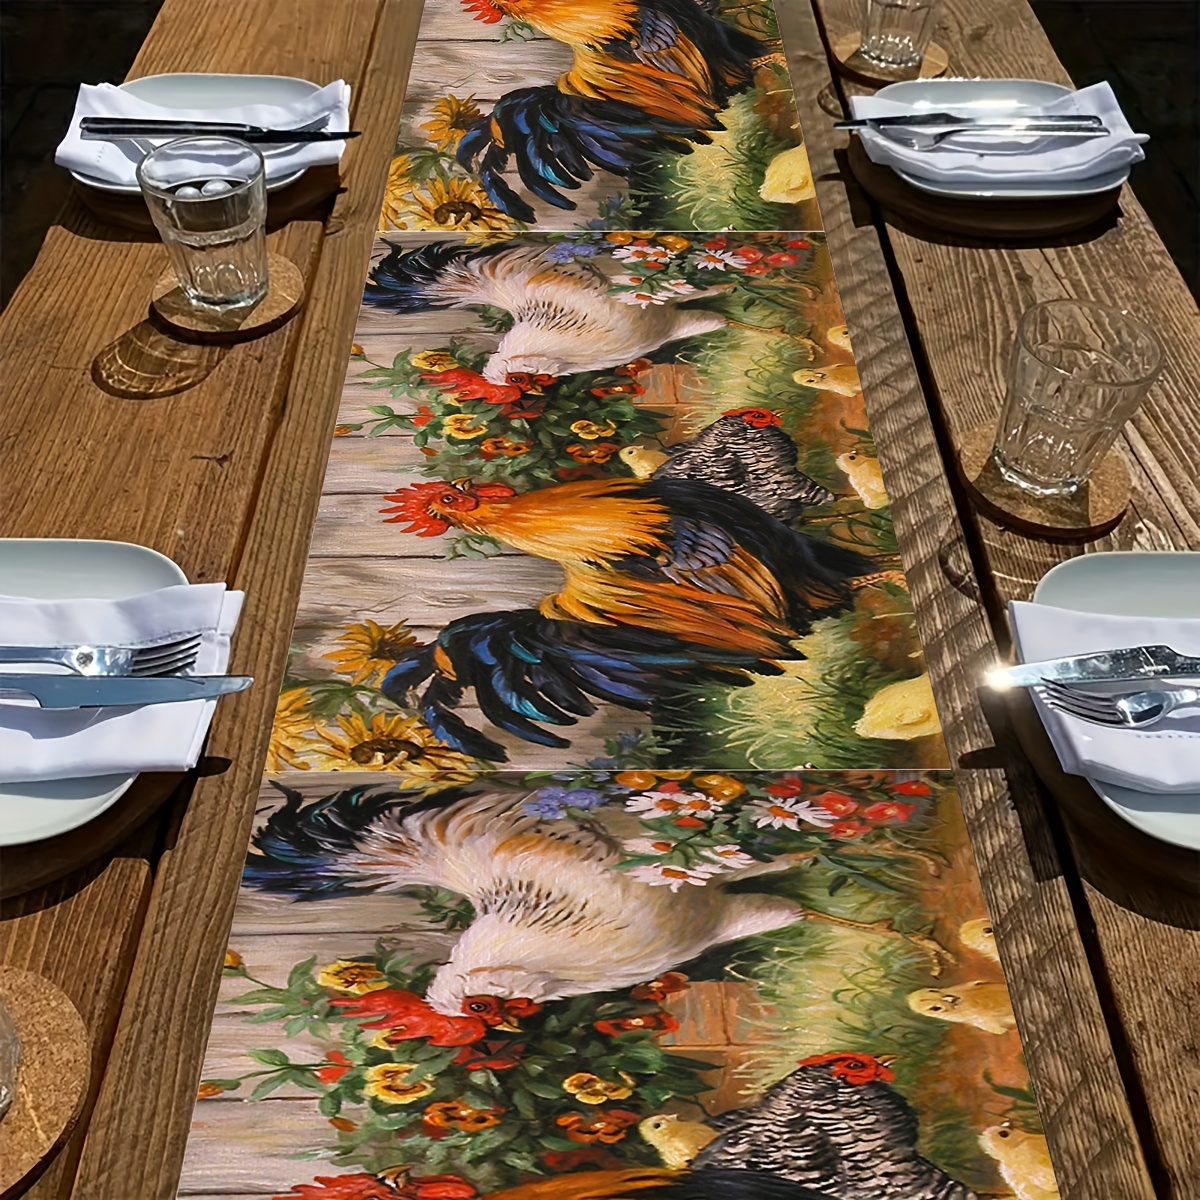 

Boho-chic Rooster & Floral Linen Table Runner - Perfect For Kitchen, Dining & Party Decor | Durable Polyester, Rectangular